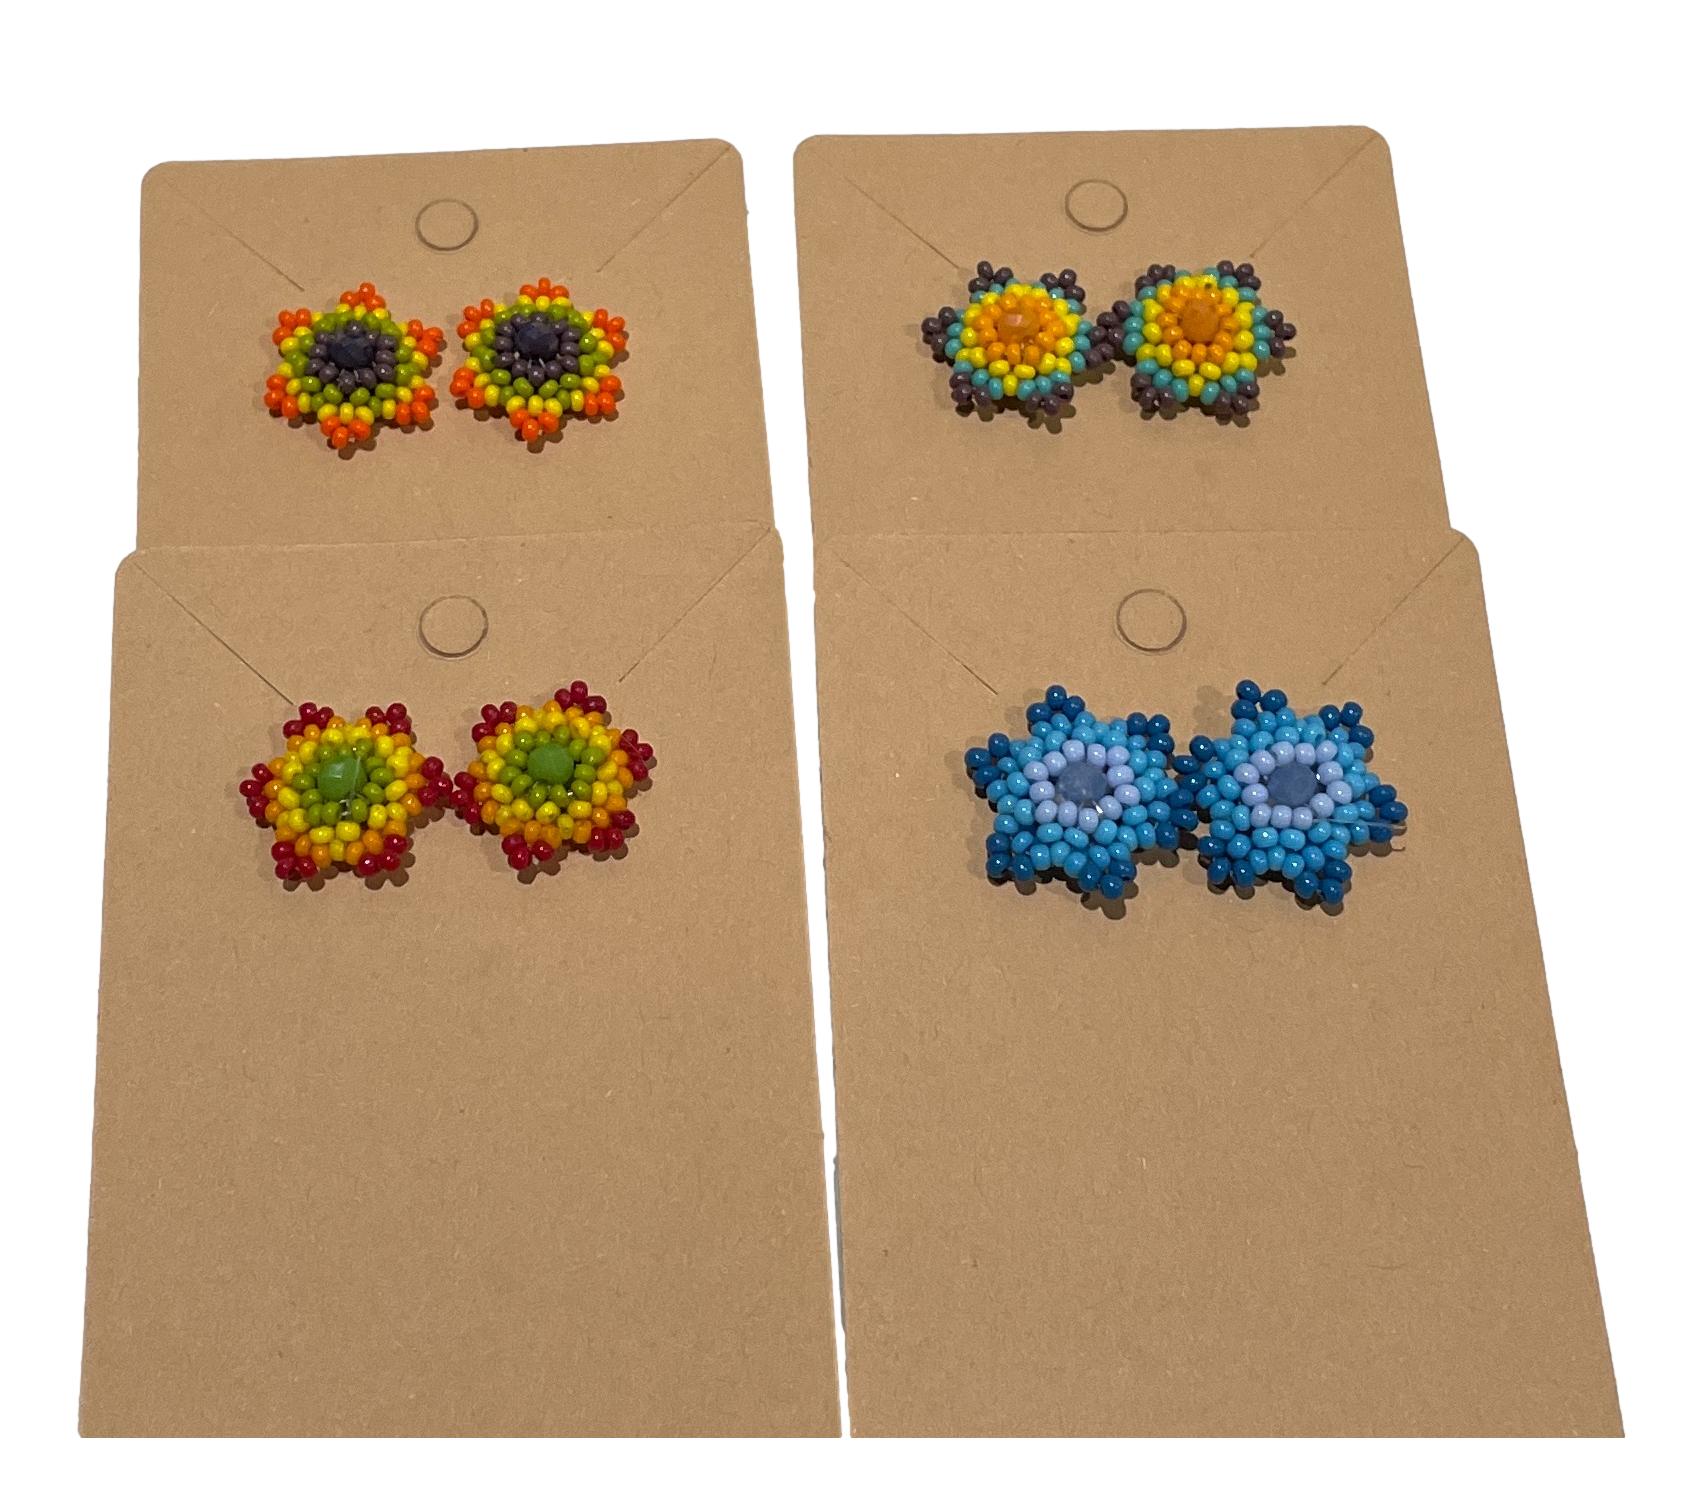 Earrings Beaded Multi-Color Handmade By Toadily - Ysleta Mission Gift Shop- VOTED El Paso's Best Gift Shop